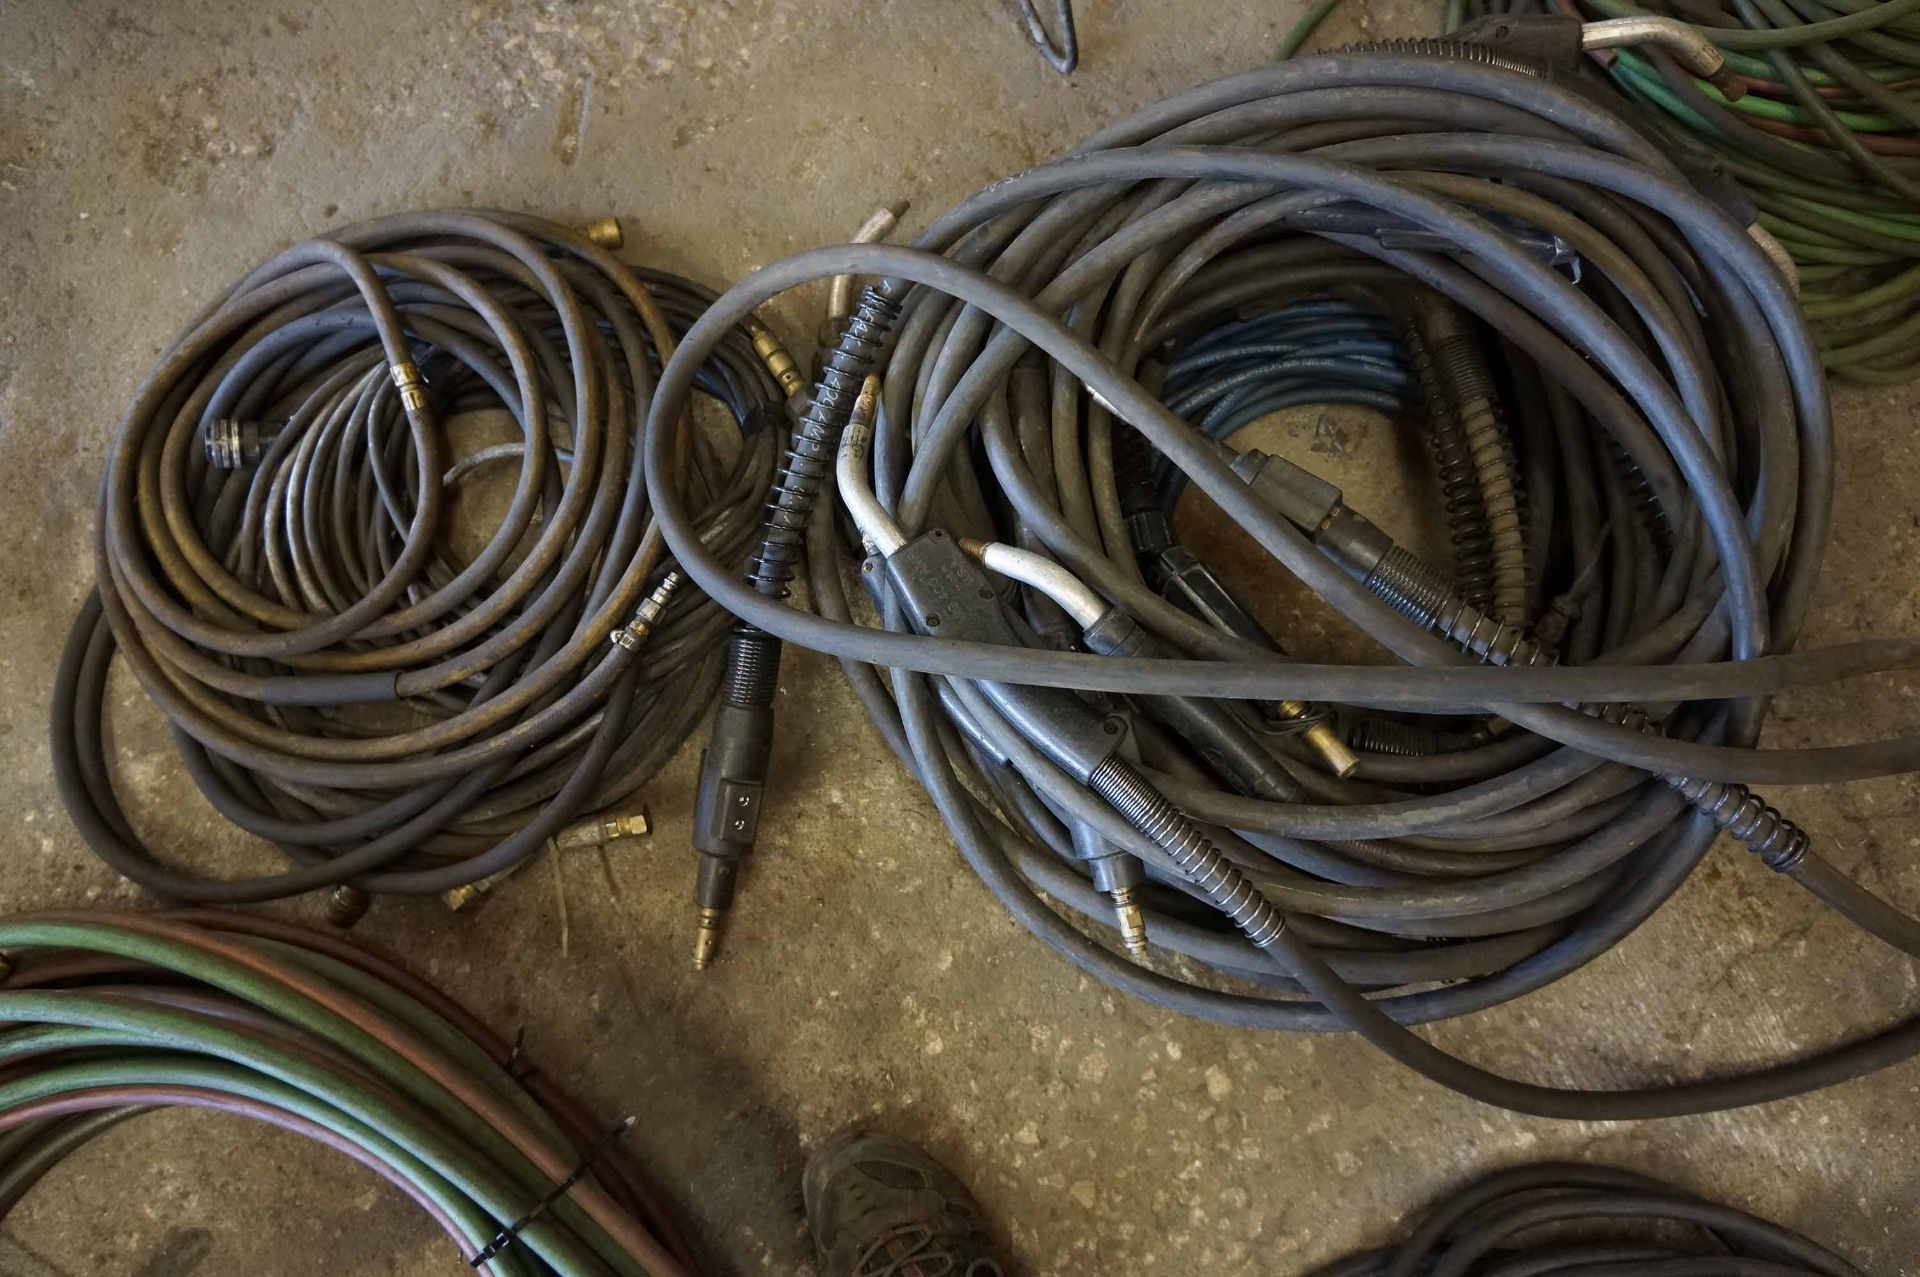 LOT CONSISTING OF: leads, torch handles & connecting cables - Image 2 of 2